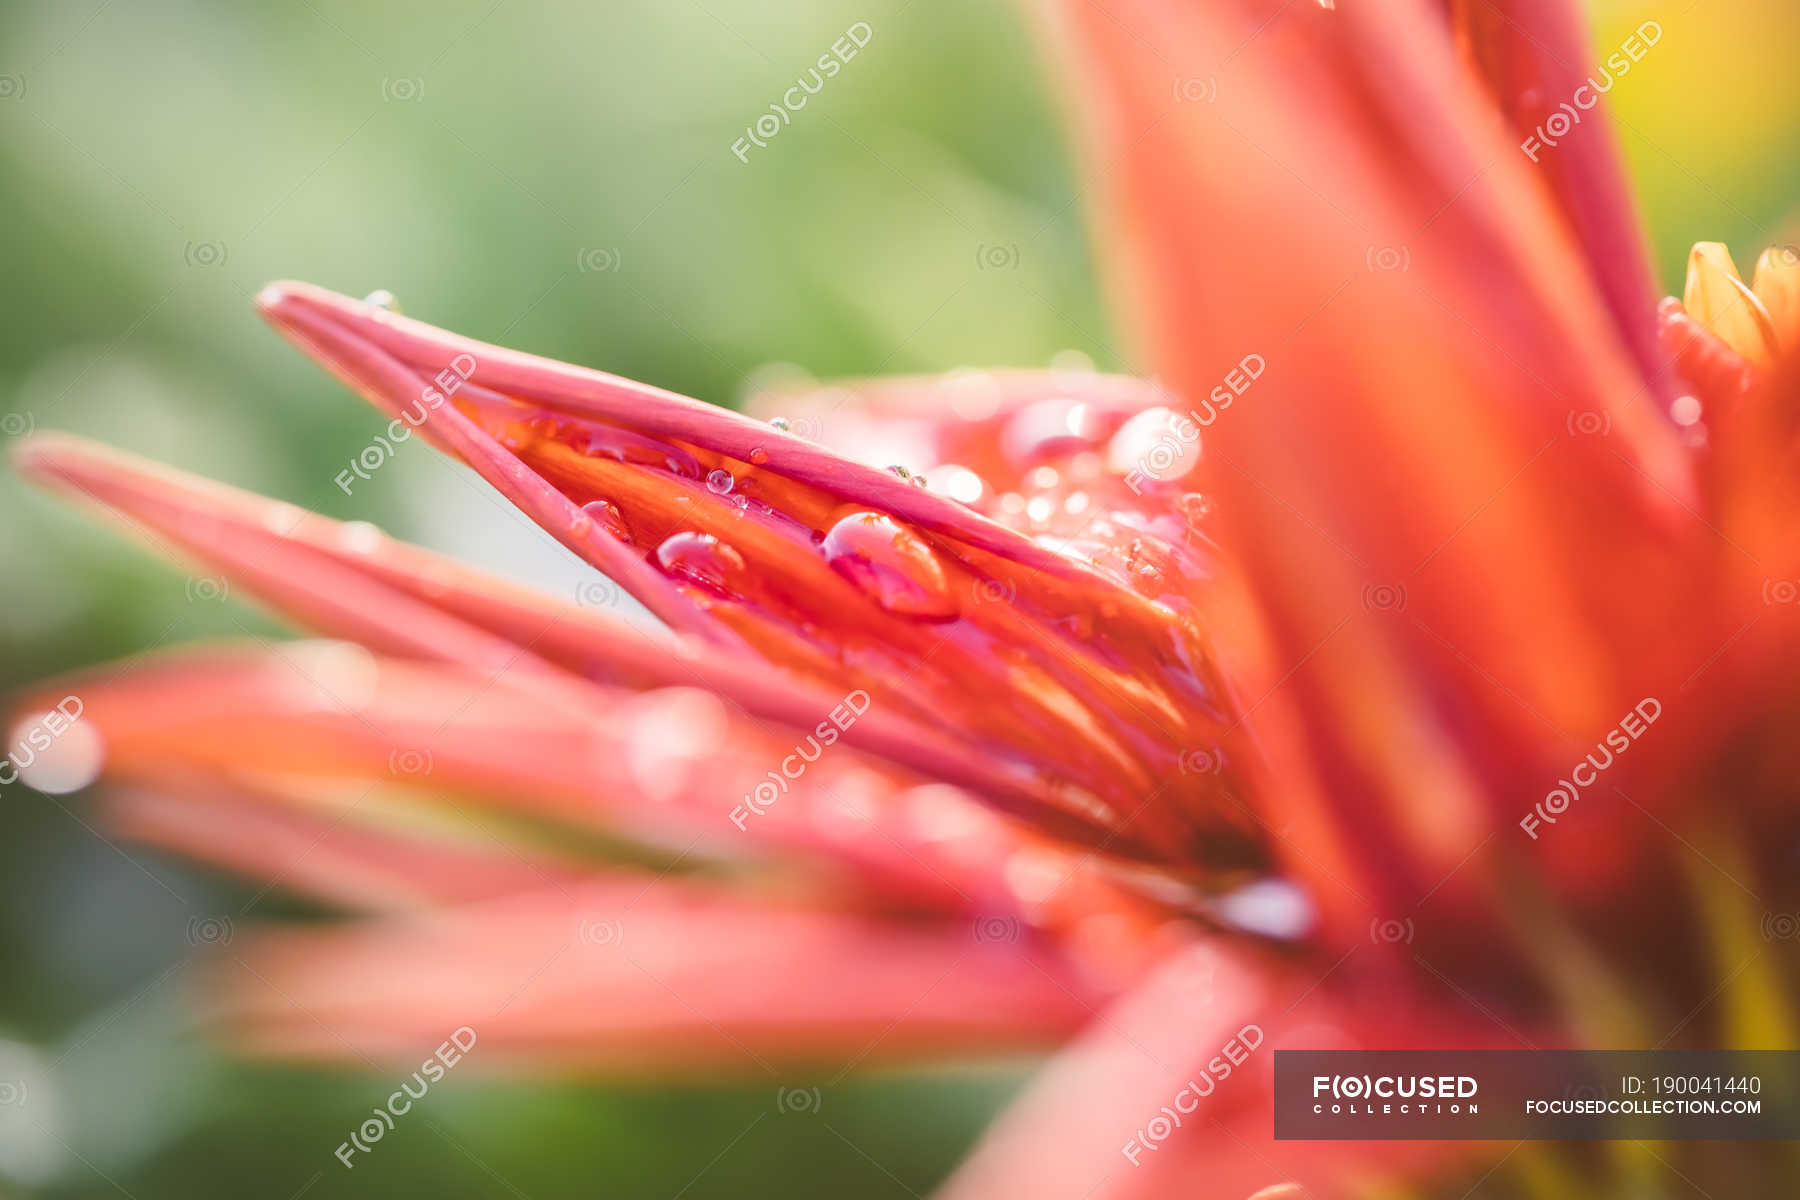 Detail of dew drops on flowers in spring — Stock Photo | #190041440